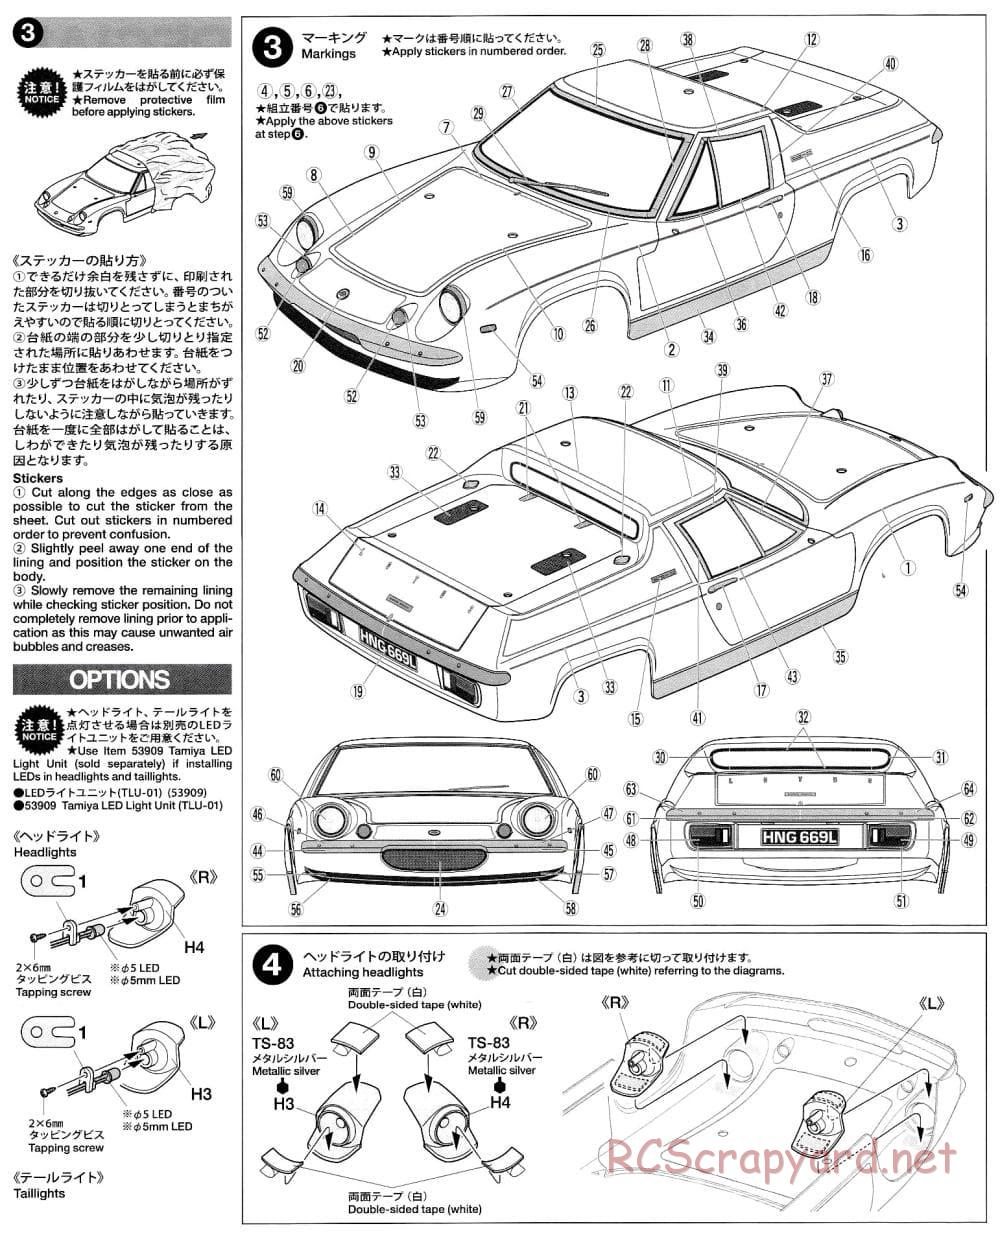 Tamiya - Lotus Europa Special - M-06 Chassis - Body Manual - Page 4